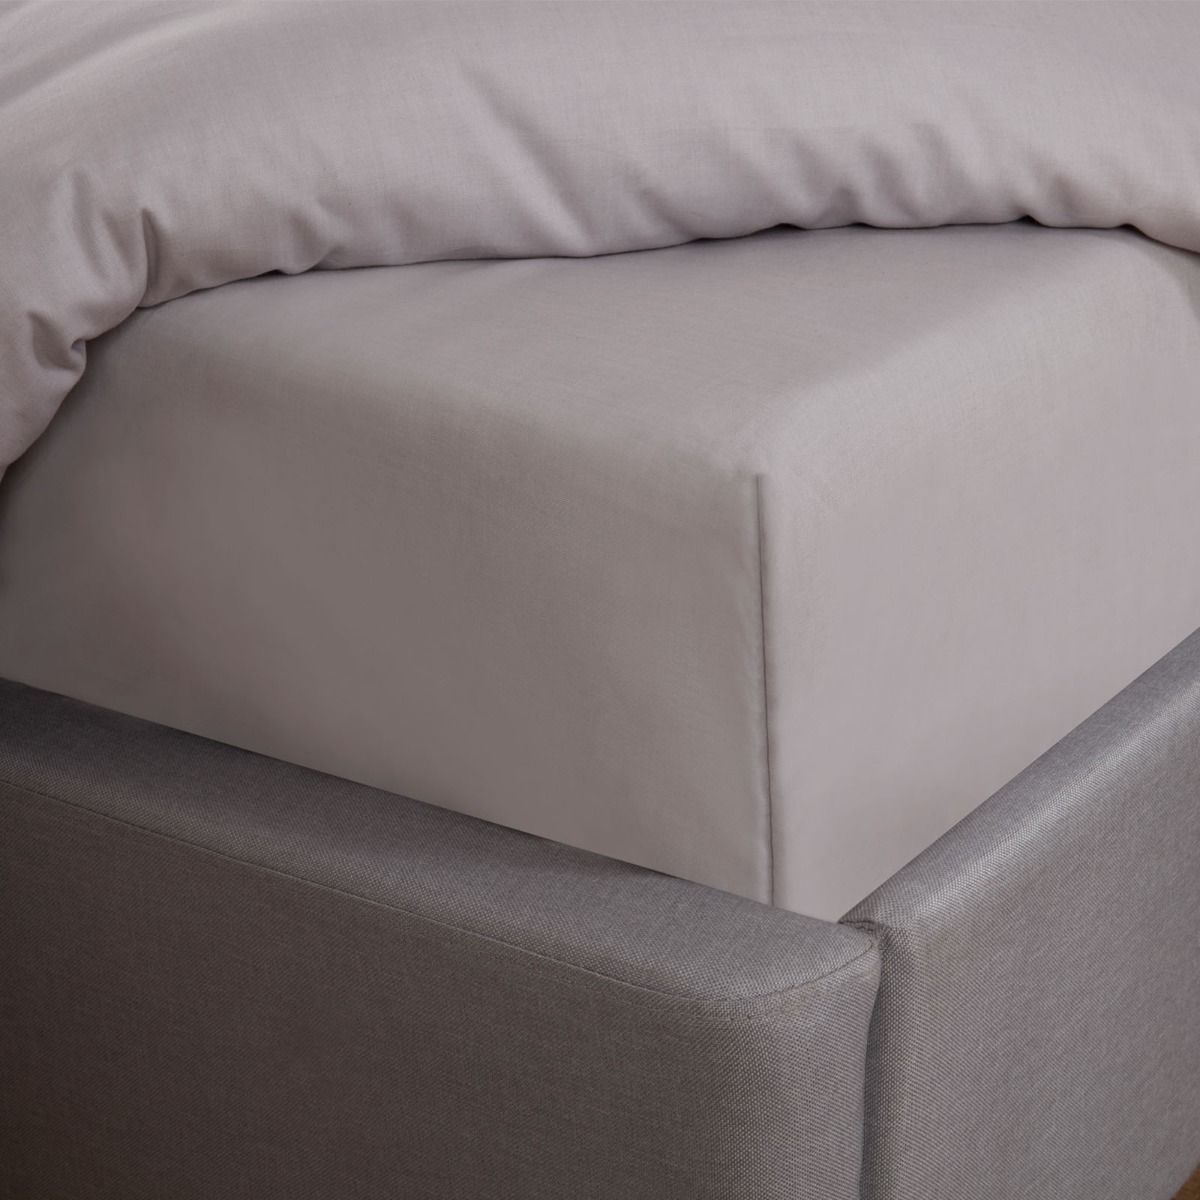 Highams Easy Care Polycotton Deep Fitted Sheet - Silver